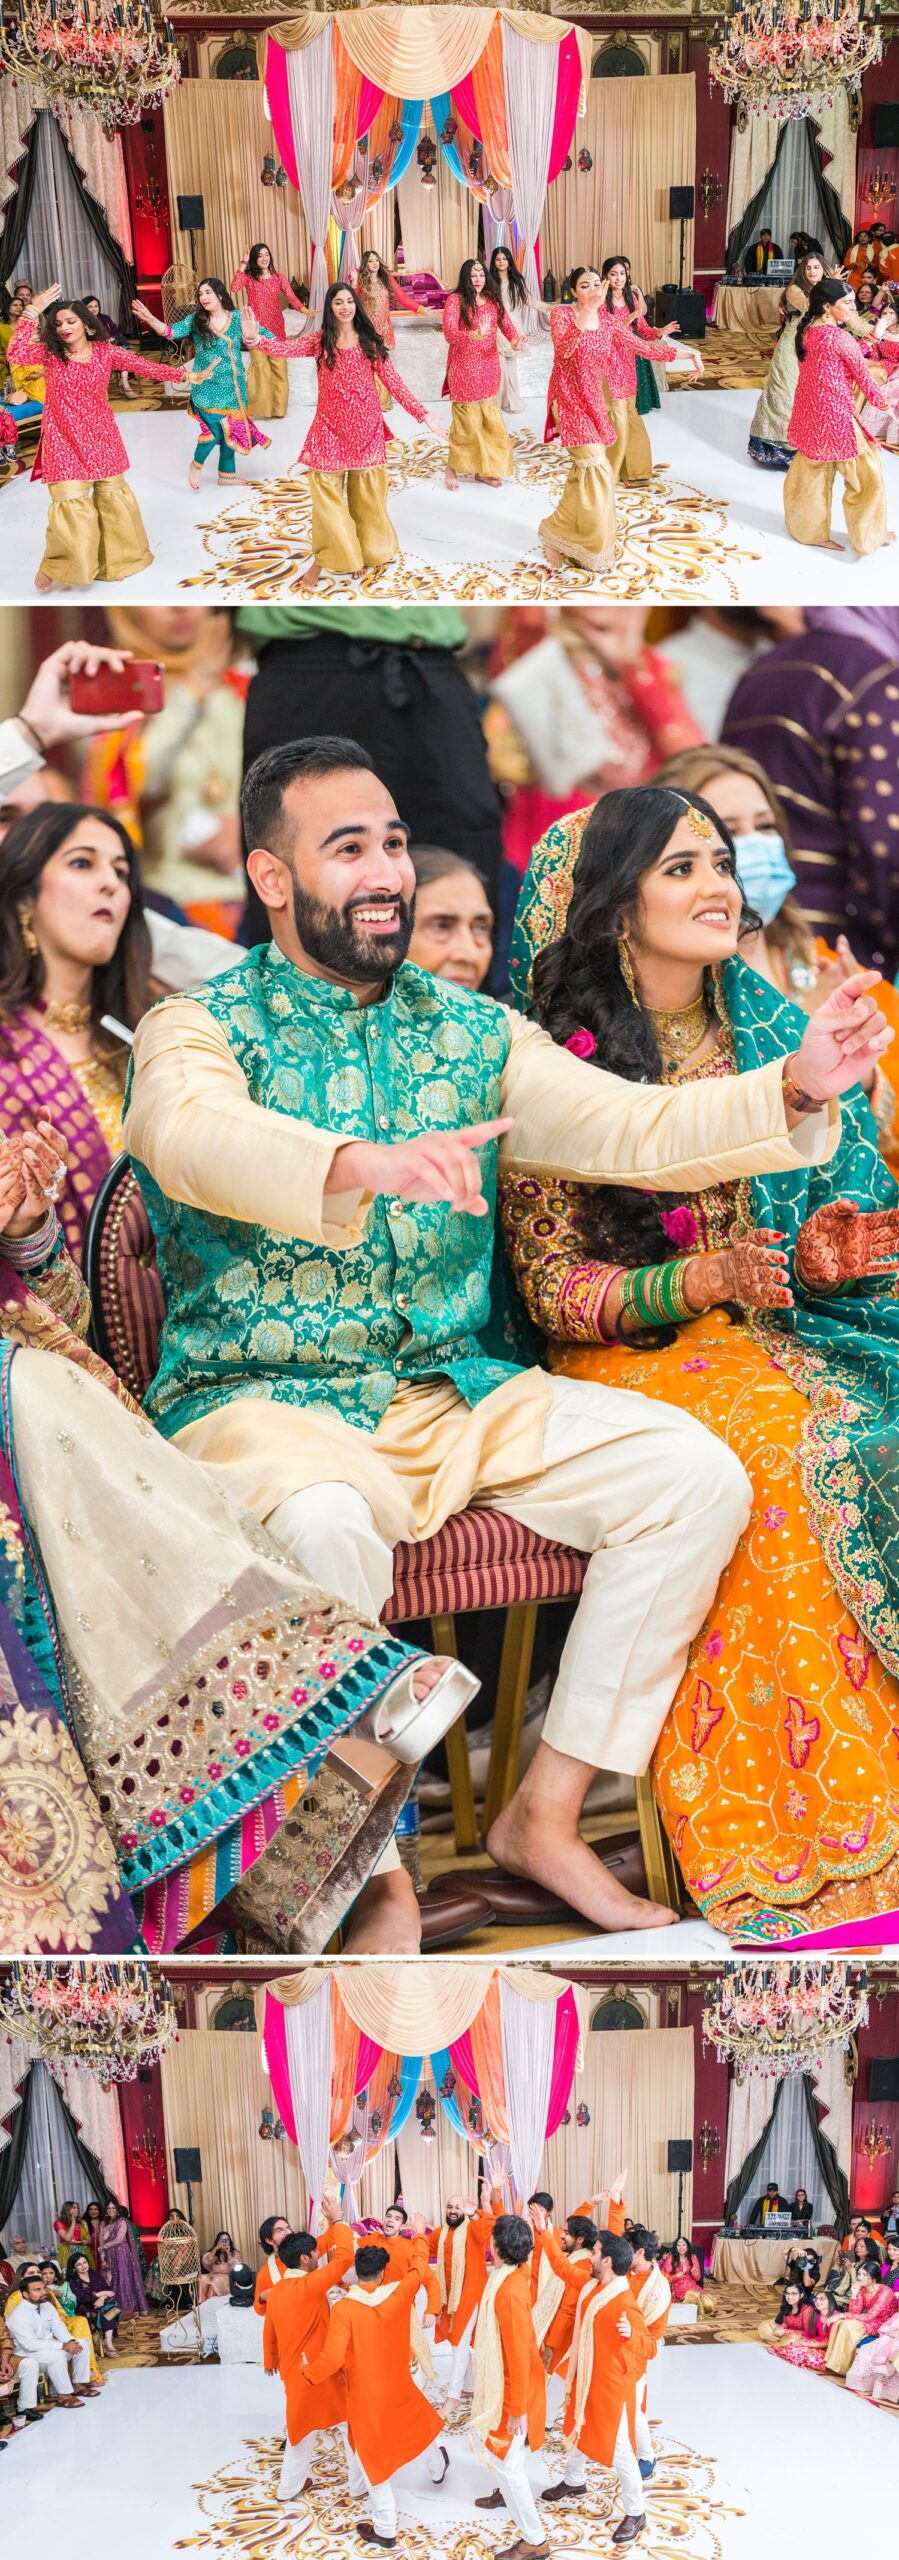 Candid photos of mehndi party dances at Palmer House wedding. Photographed by Maha Studios